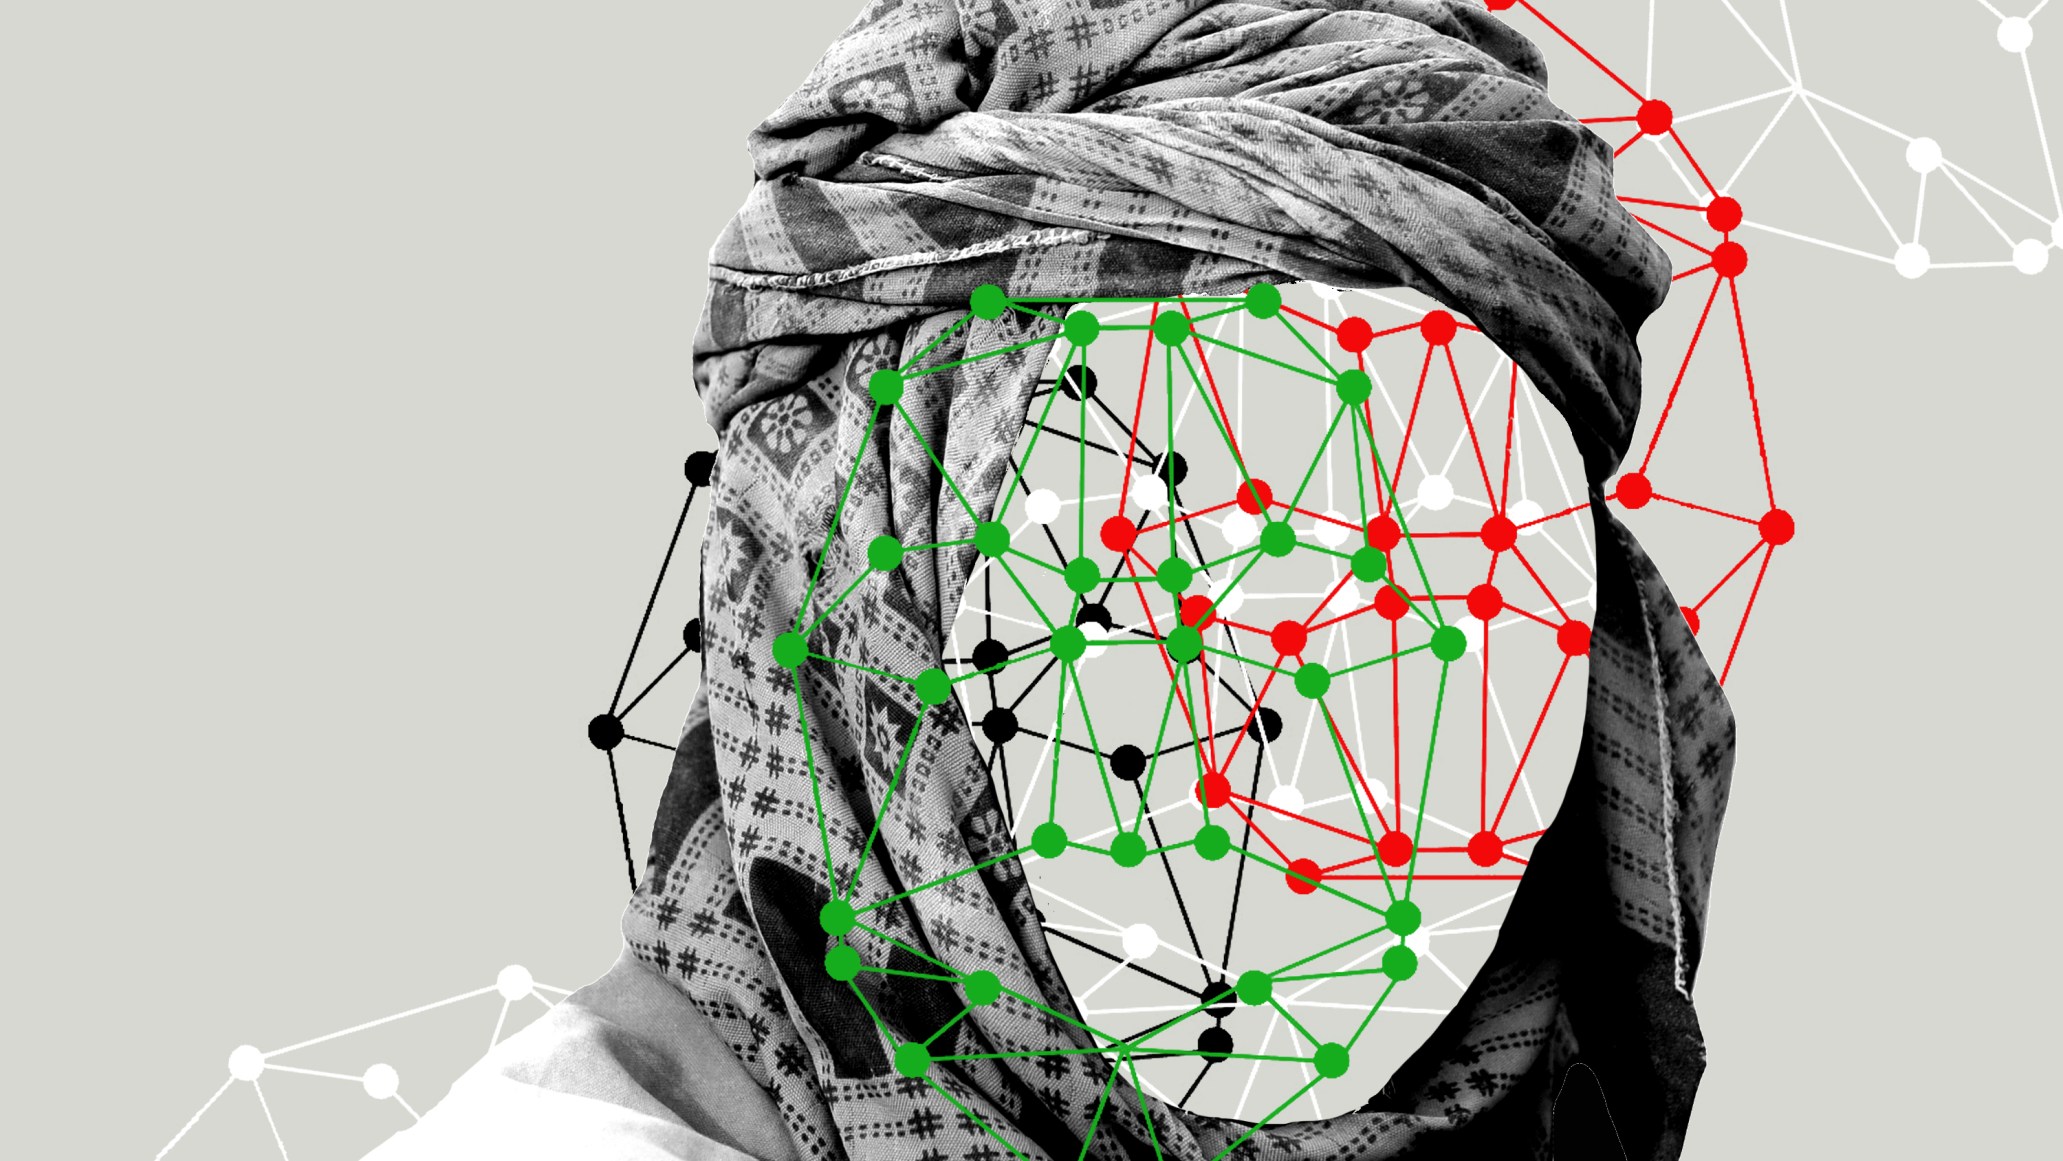 This is the real story of the Afghan biometric databases abandoned to the Taliban